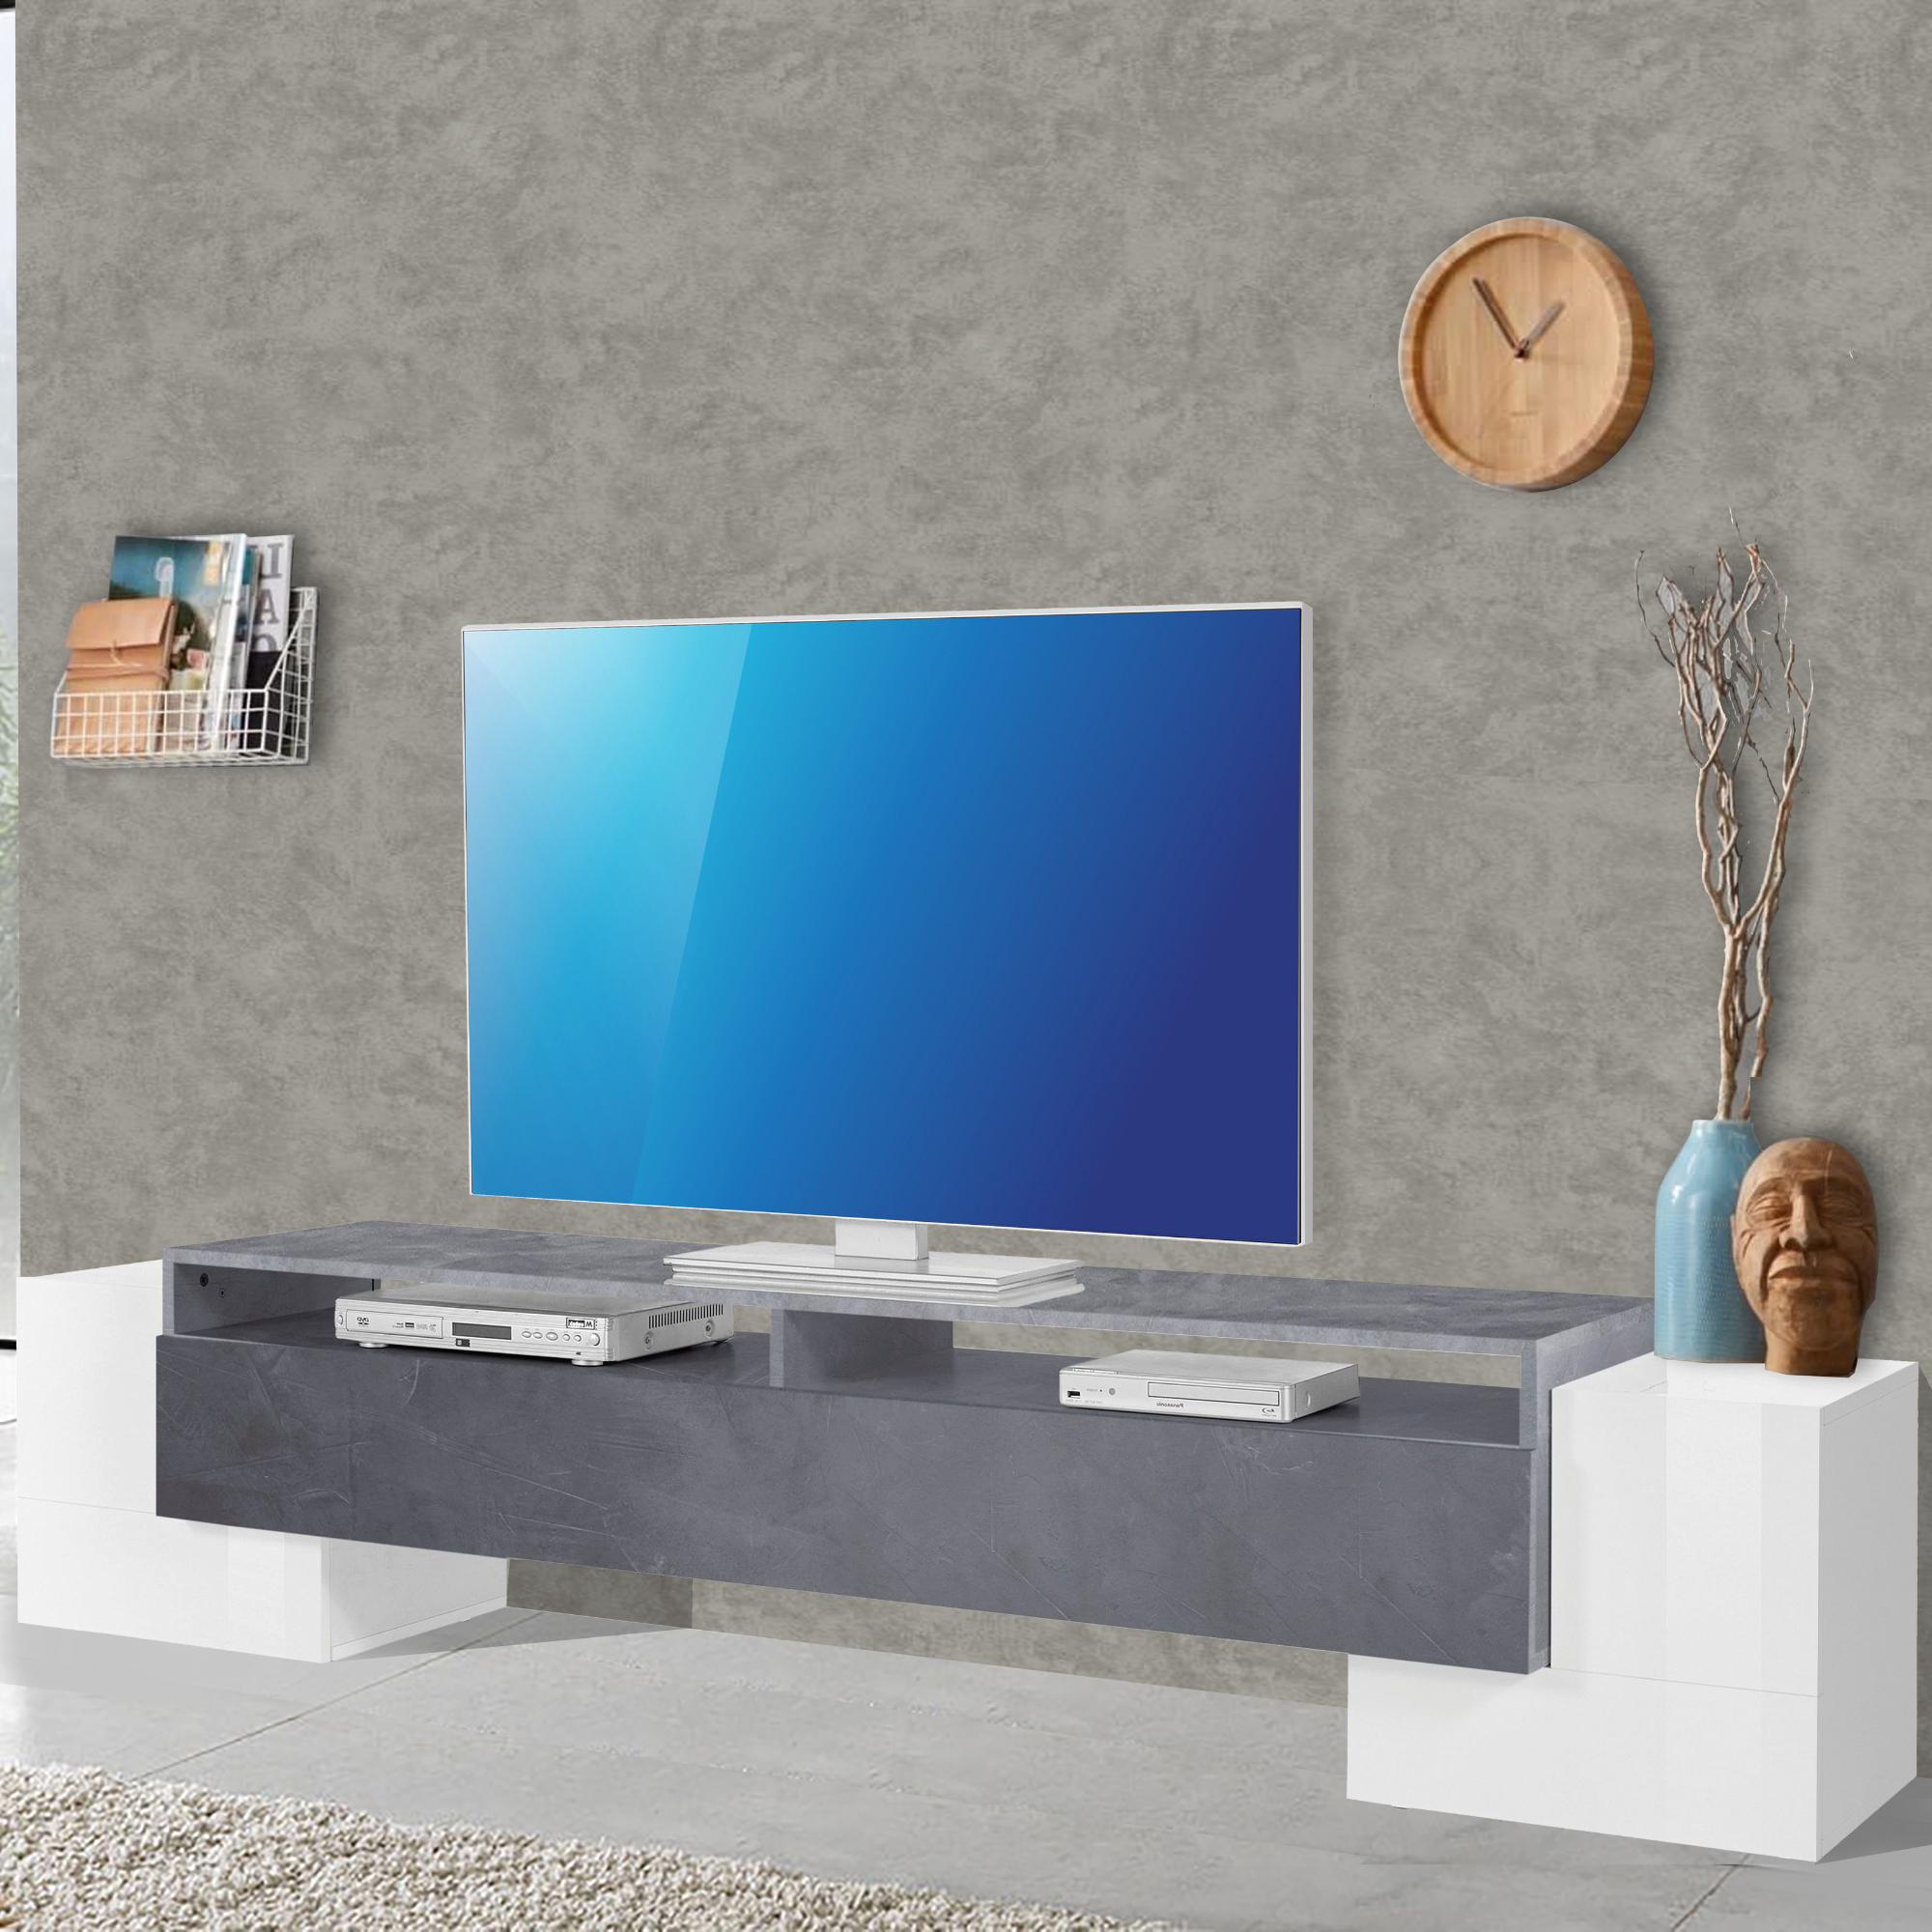 Stylish and Modern "Pillon" TV Stand with 3 Doors - Made in Italy - Furniture.Agency